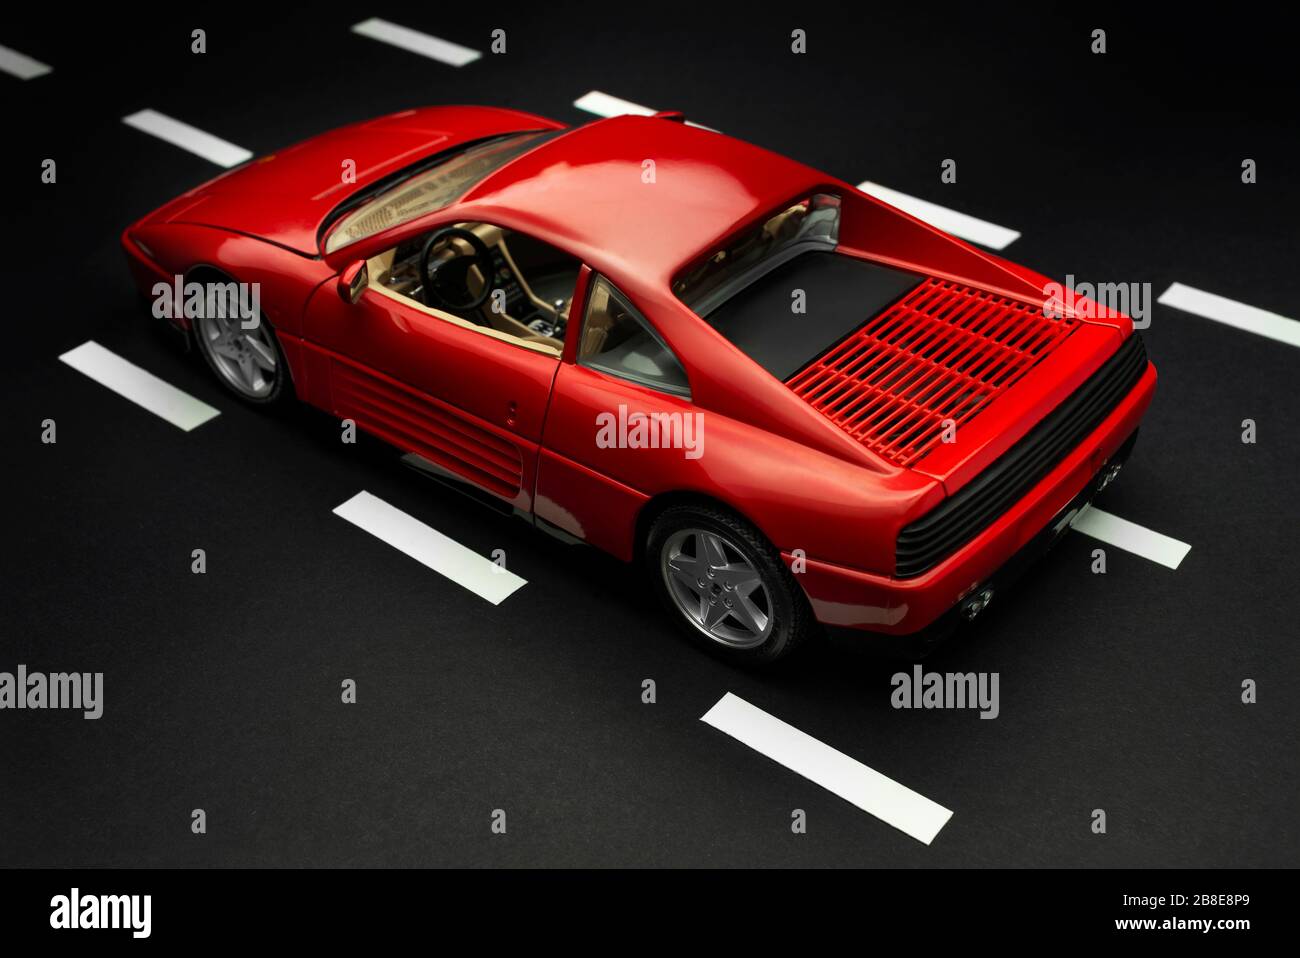 Izmir, Turkey - July 28, 2019: Old fashion Red sports toy car on a road with lanes from rear view. Stock Photo